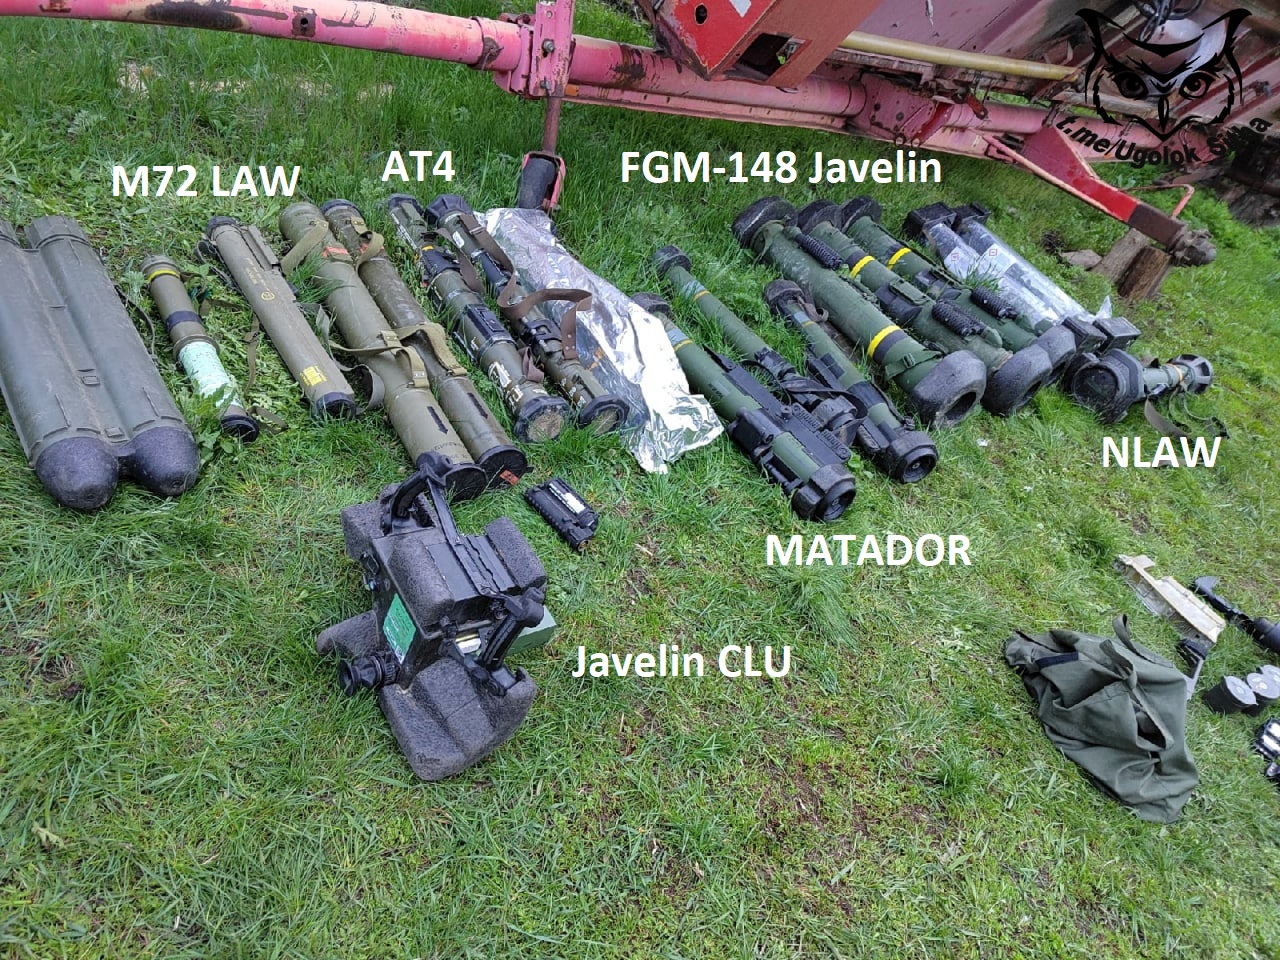 Russian Army Captured More Western-Made Weapons From Kiev Forces In Donbass (Photos)